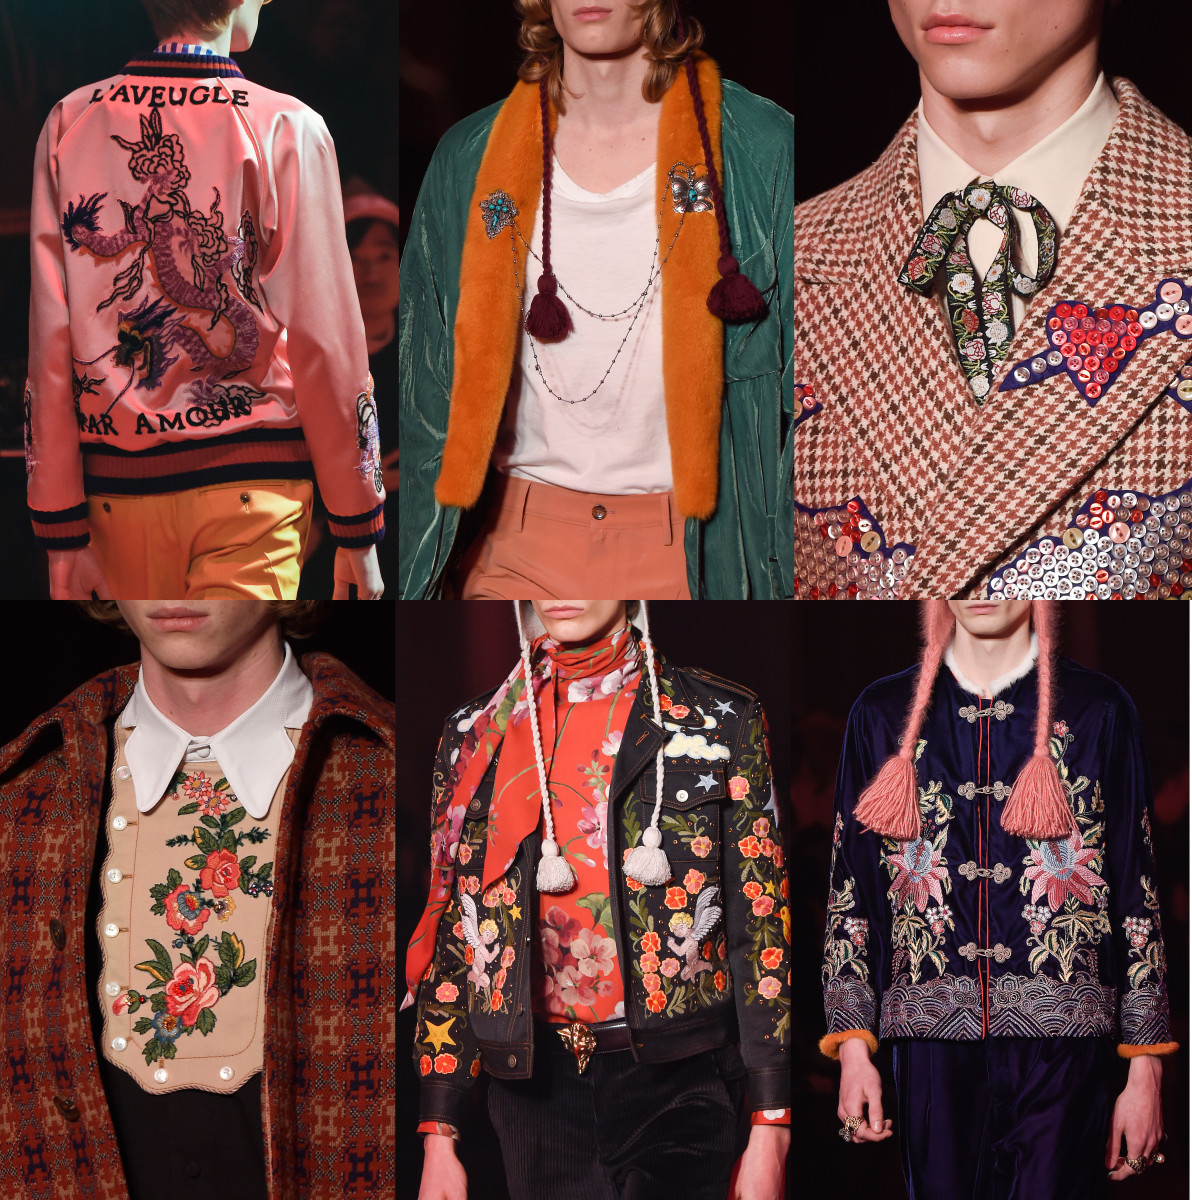 Veil shortly Venture The Gucci Men's Fall Collection Was All About the Details - Fashionista